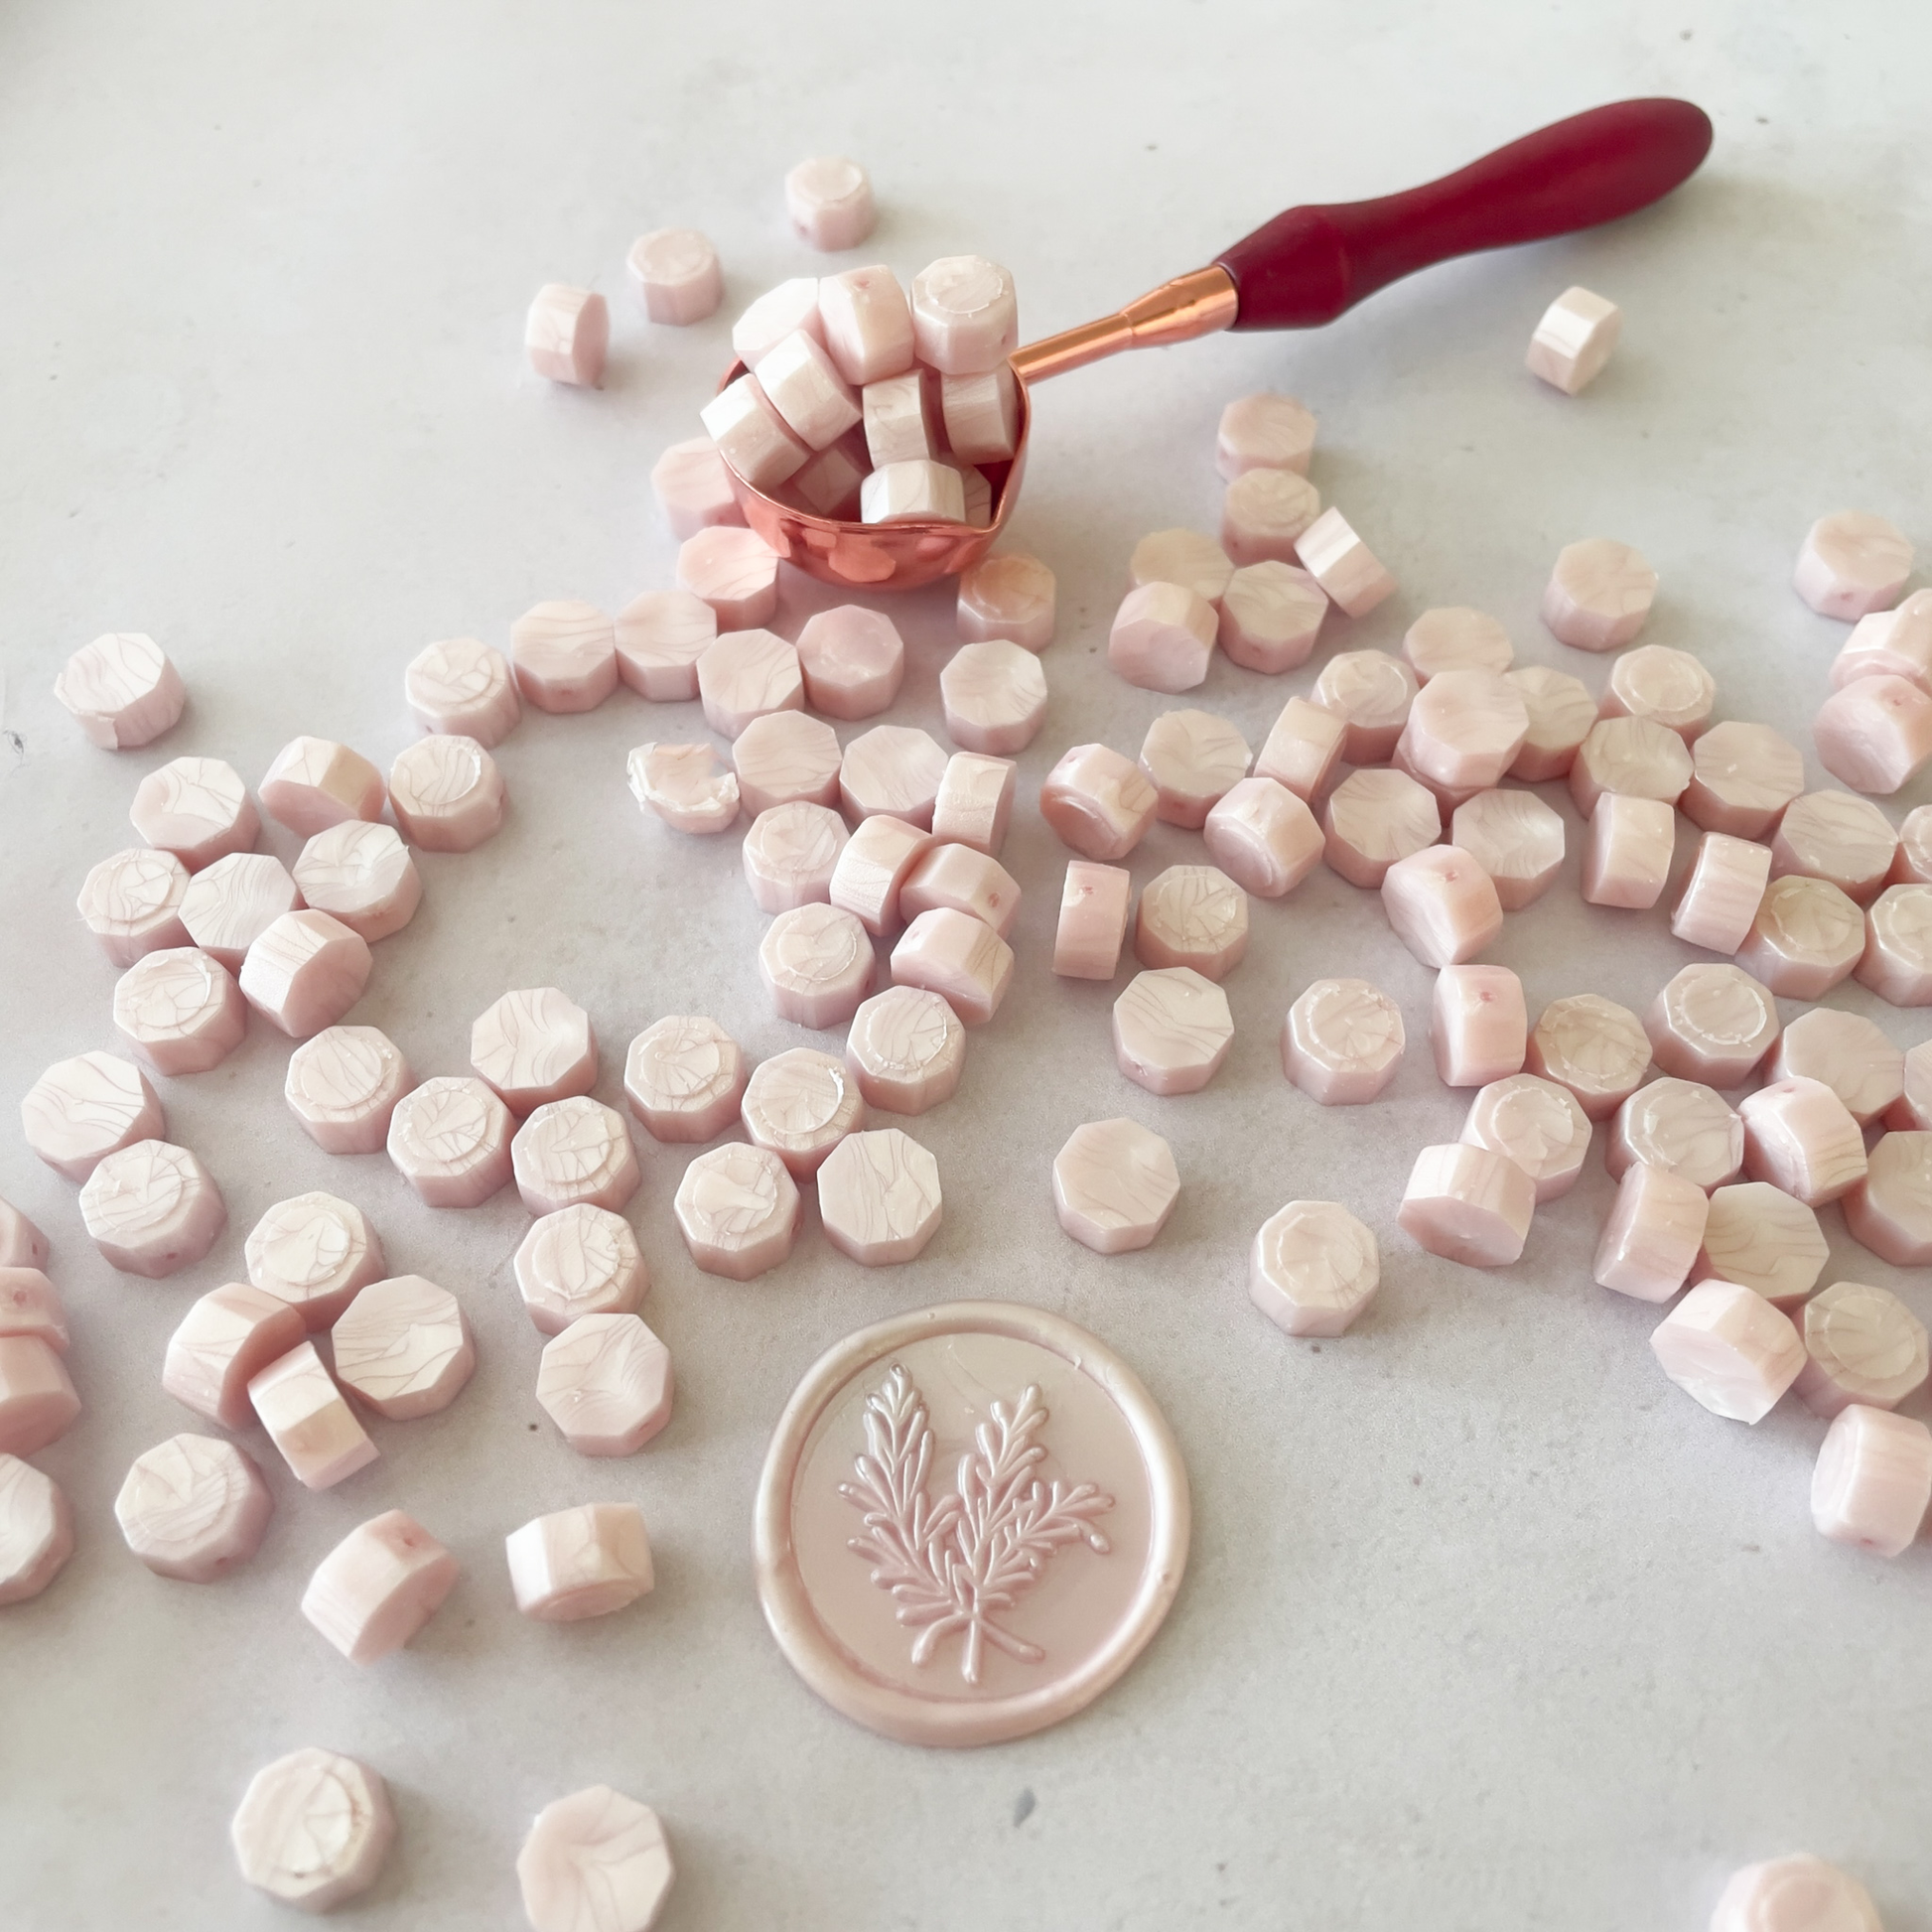 blush pink sealing wax beads with a pearlised finish.  Small wax beads for making wax stamps and seals.  